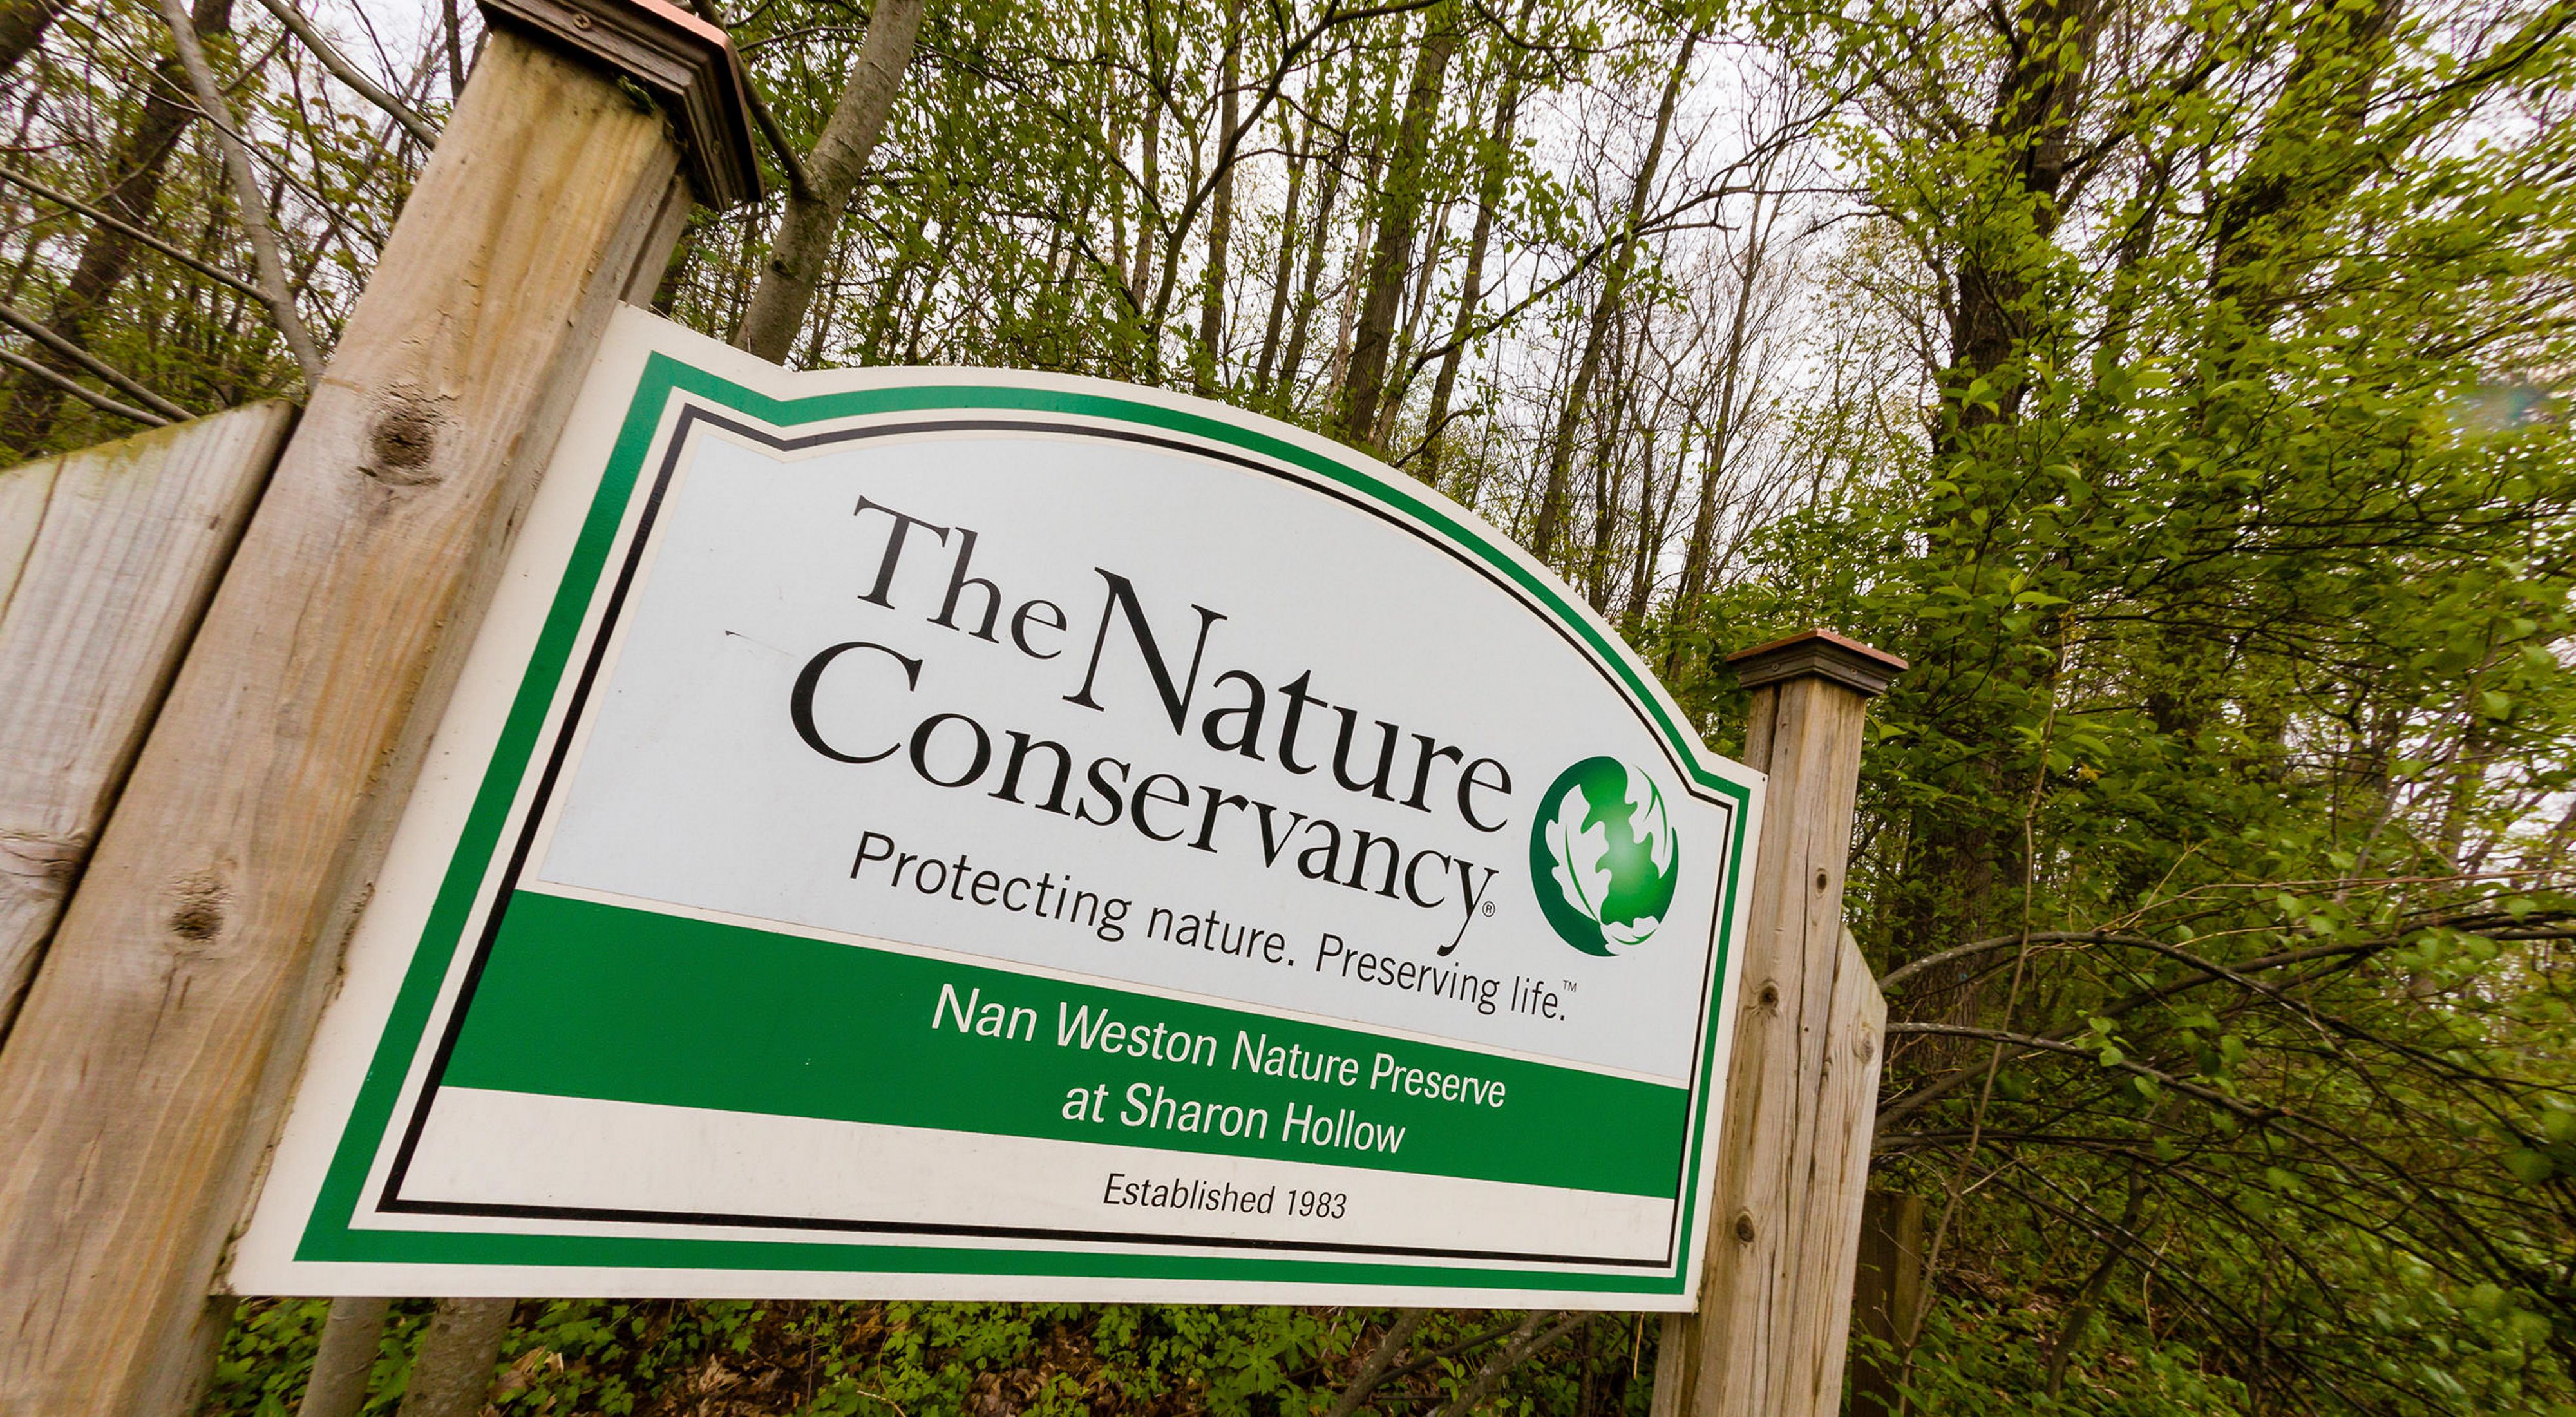 Preserve kiosk sign for The Nature Conservancy's Nan Weston Nature Preserve at Sharon Hollow.